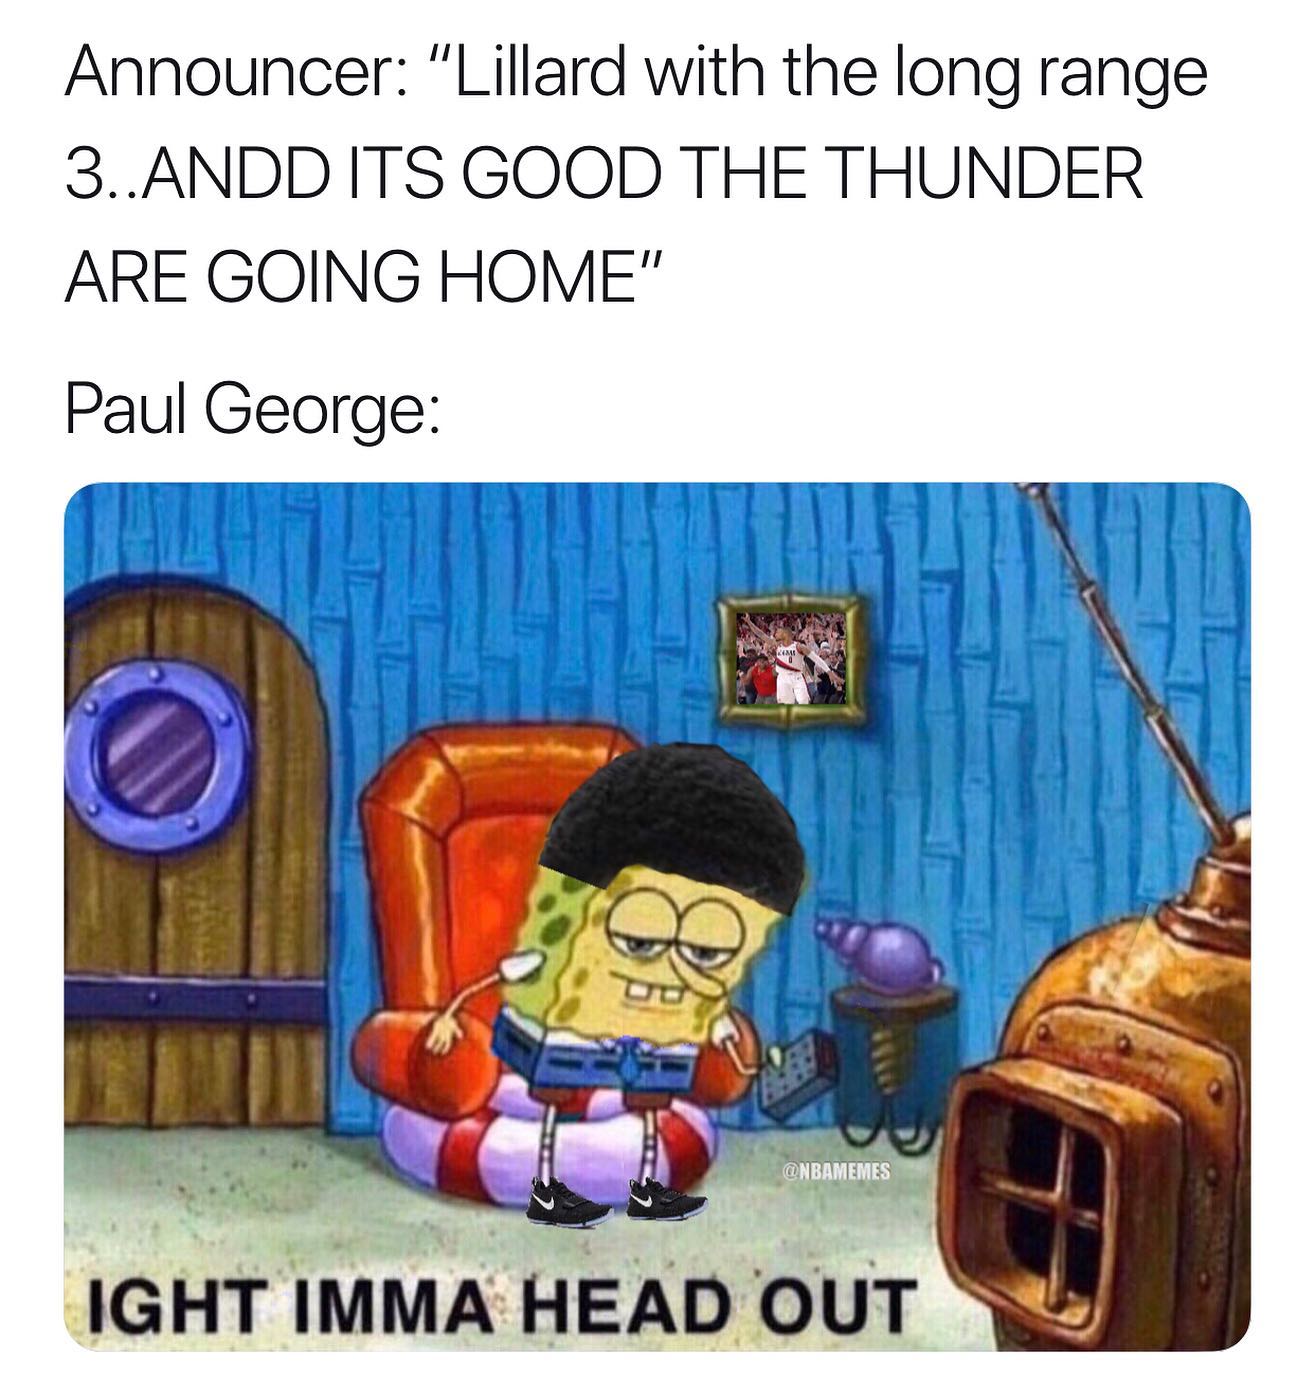 ight ima head out - ight imma head out - Announcer "Lillard with the long range 3..Andd Its Good The Thunder Are Going Home" Paul George Ight Imma Head Out